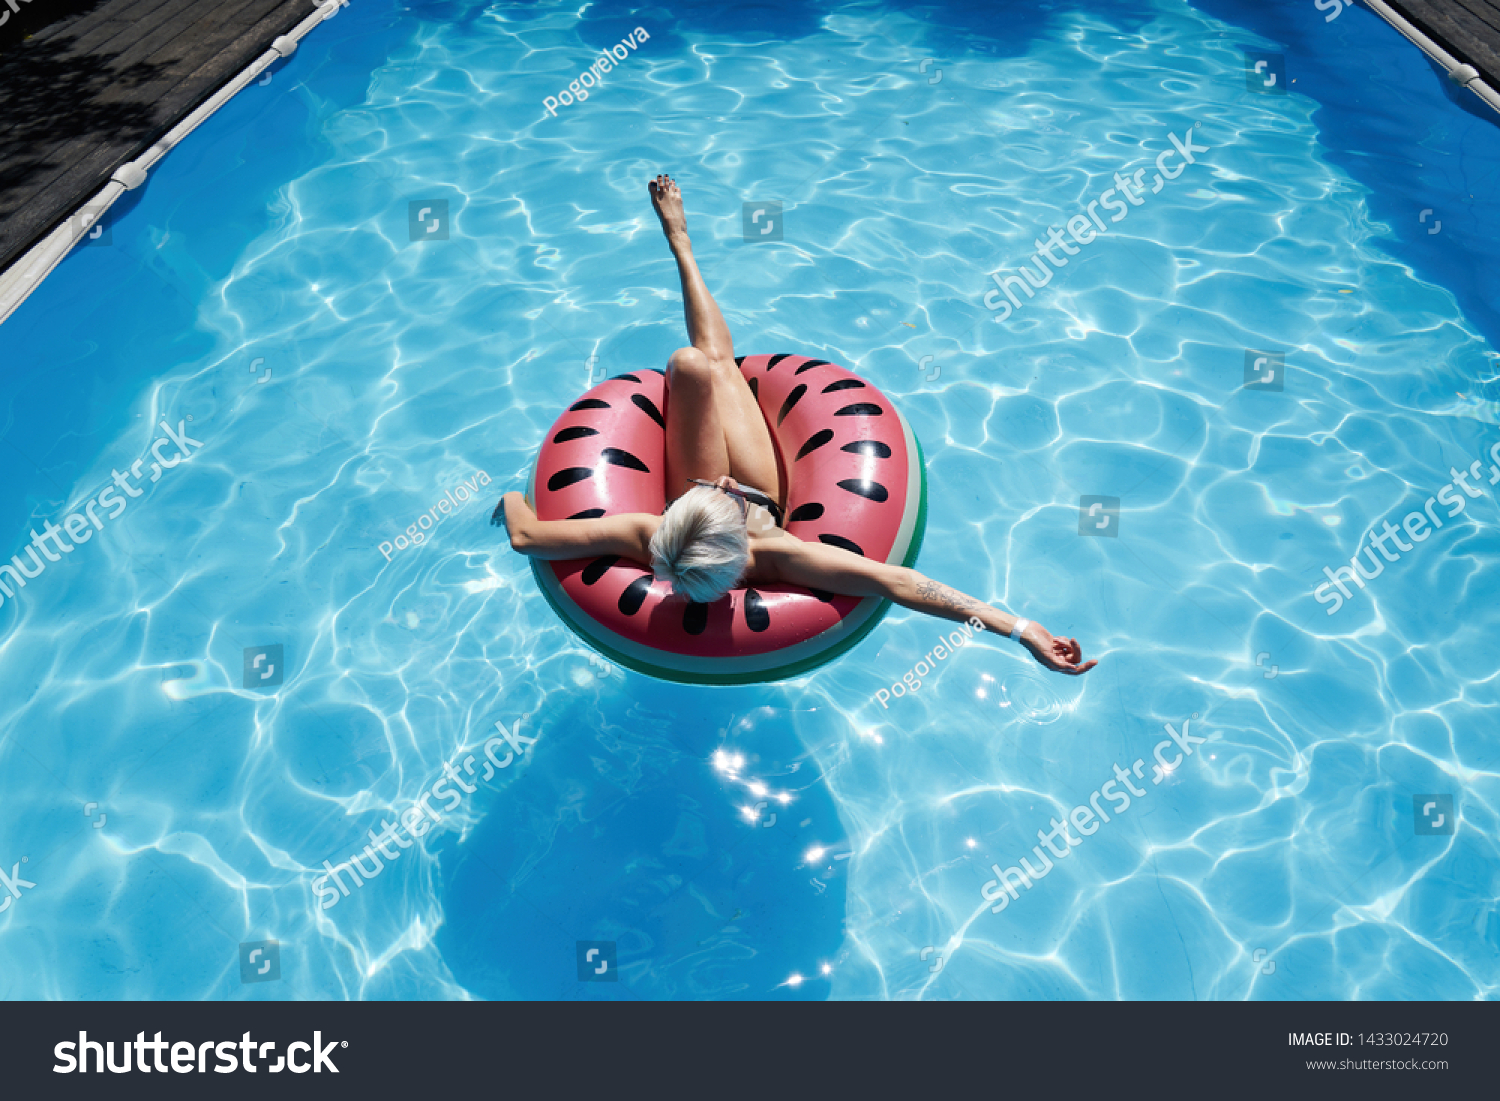 Woman with short hair swimming relaxing in a pool with pink floatie Inflatable doughnut, blue water, chill, tanning under sun.                        #1433024720